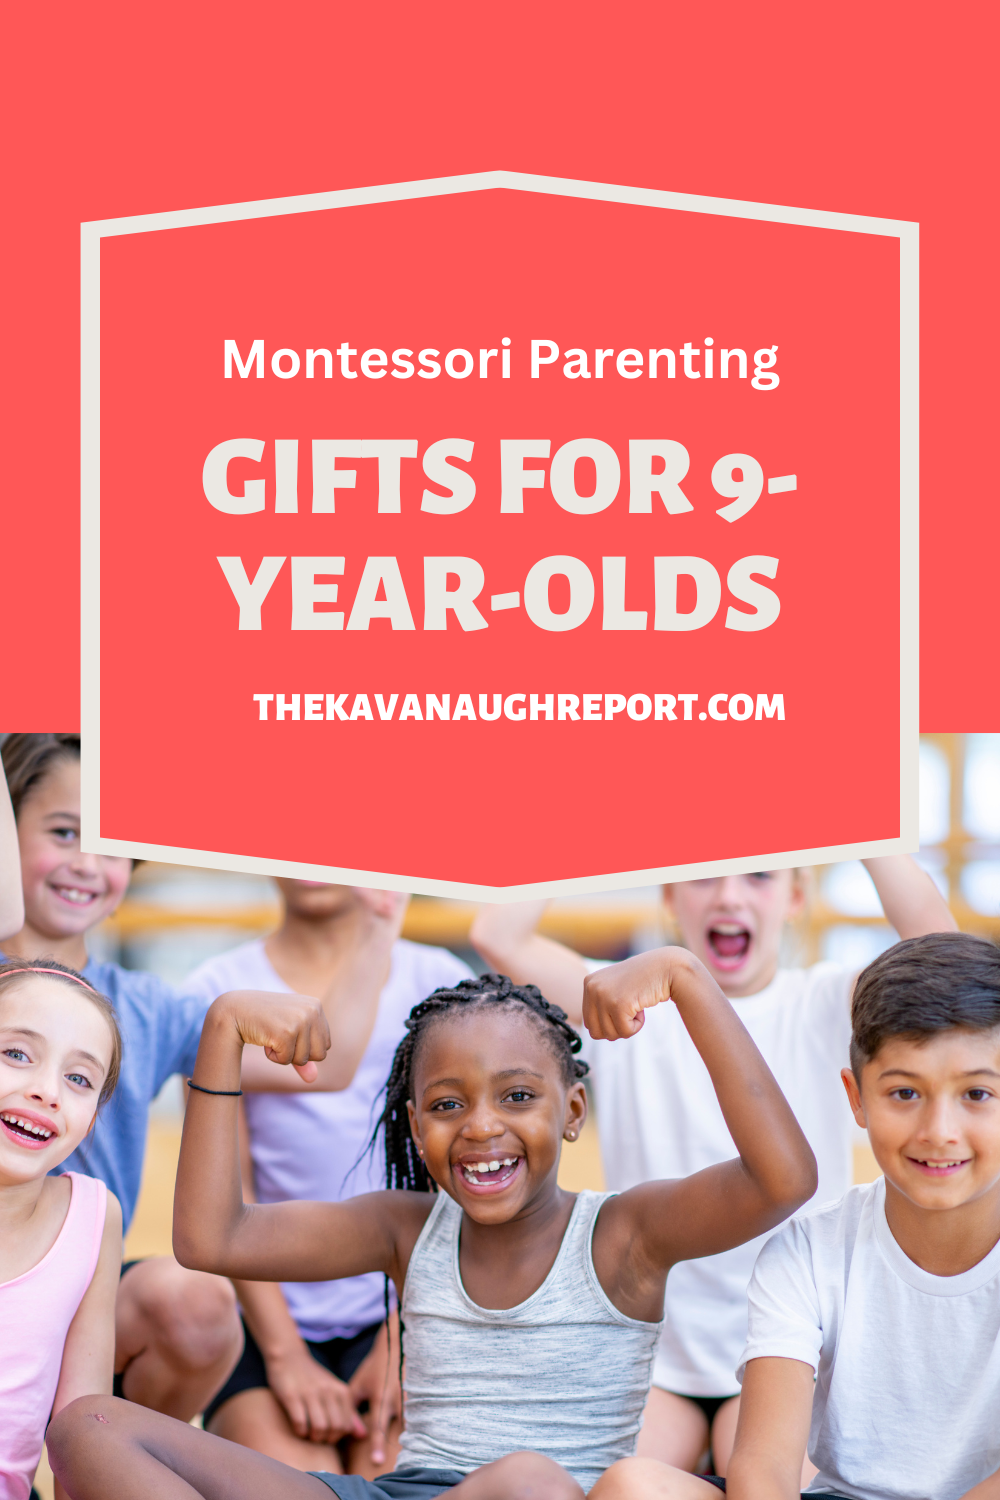 Inspire independence and self-care with these Montessori-friendly practical life gifts for your 9-year-olds. From water bottle holders to hair scrunchies, nurture their skills and watch them grow in confidence.